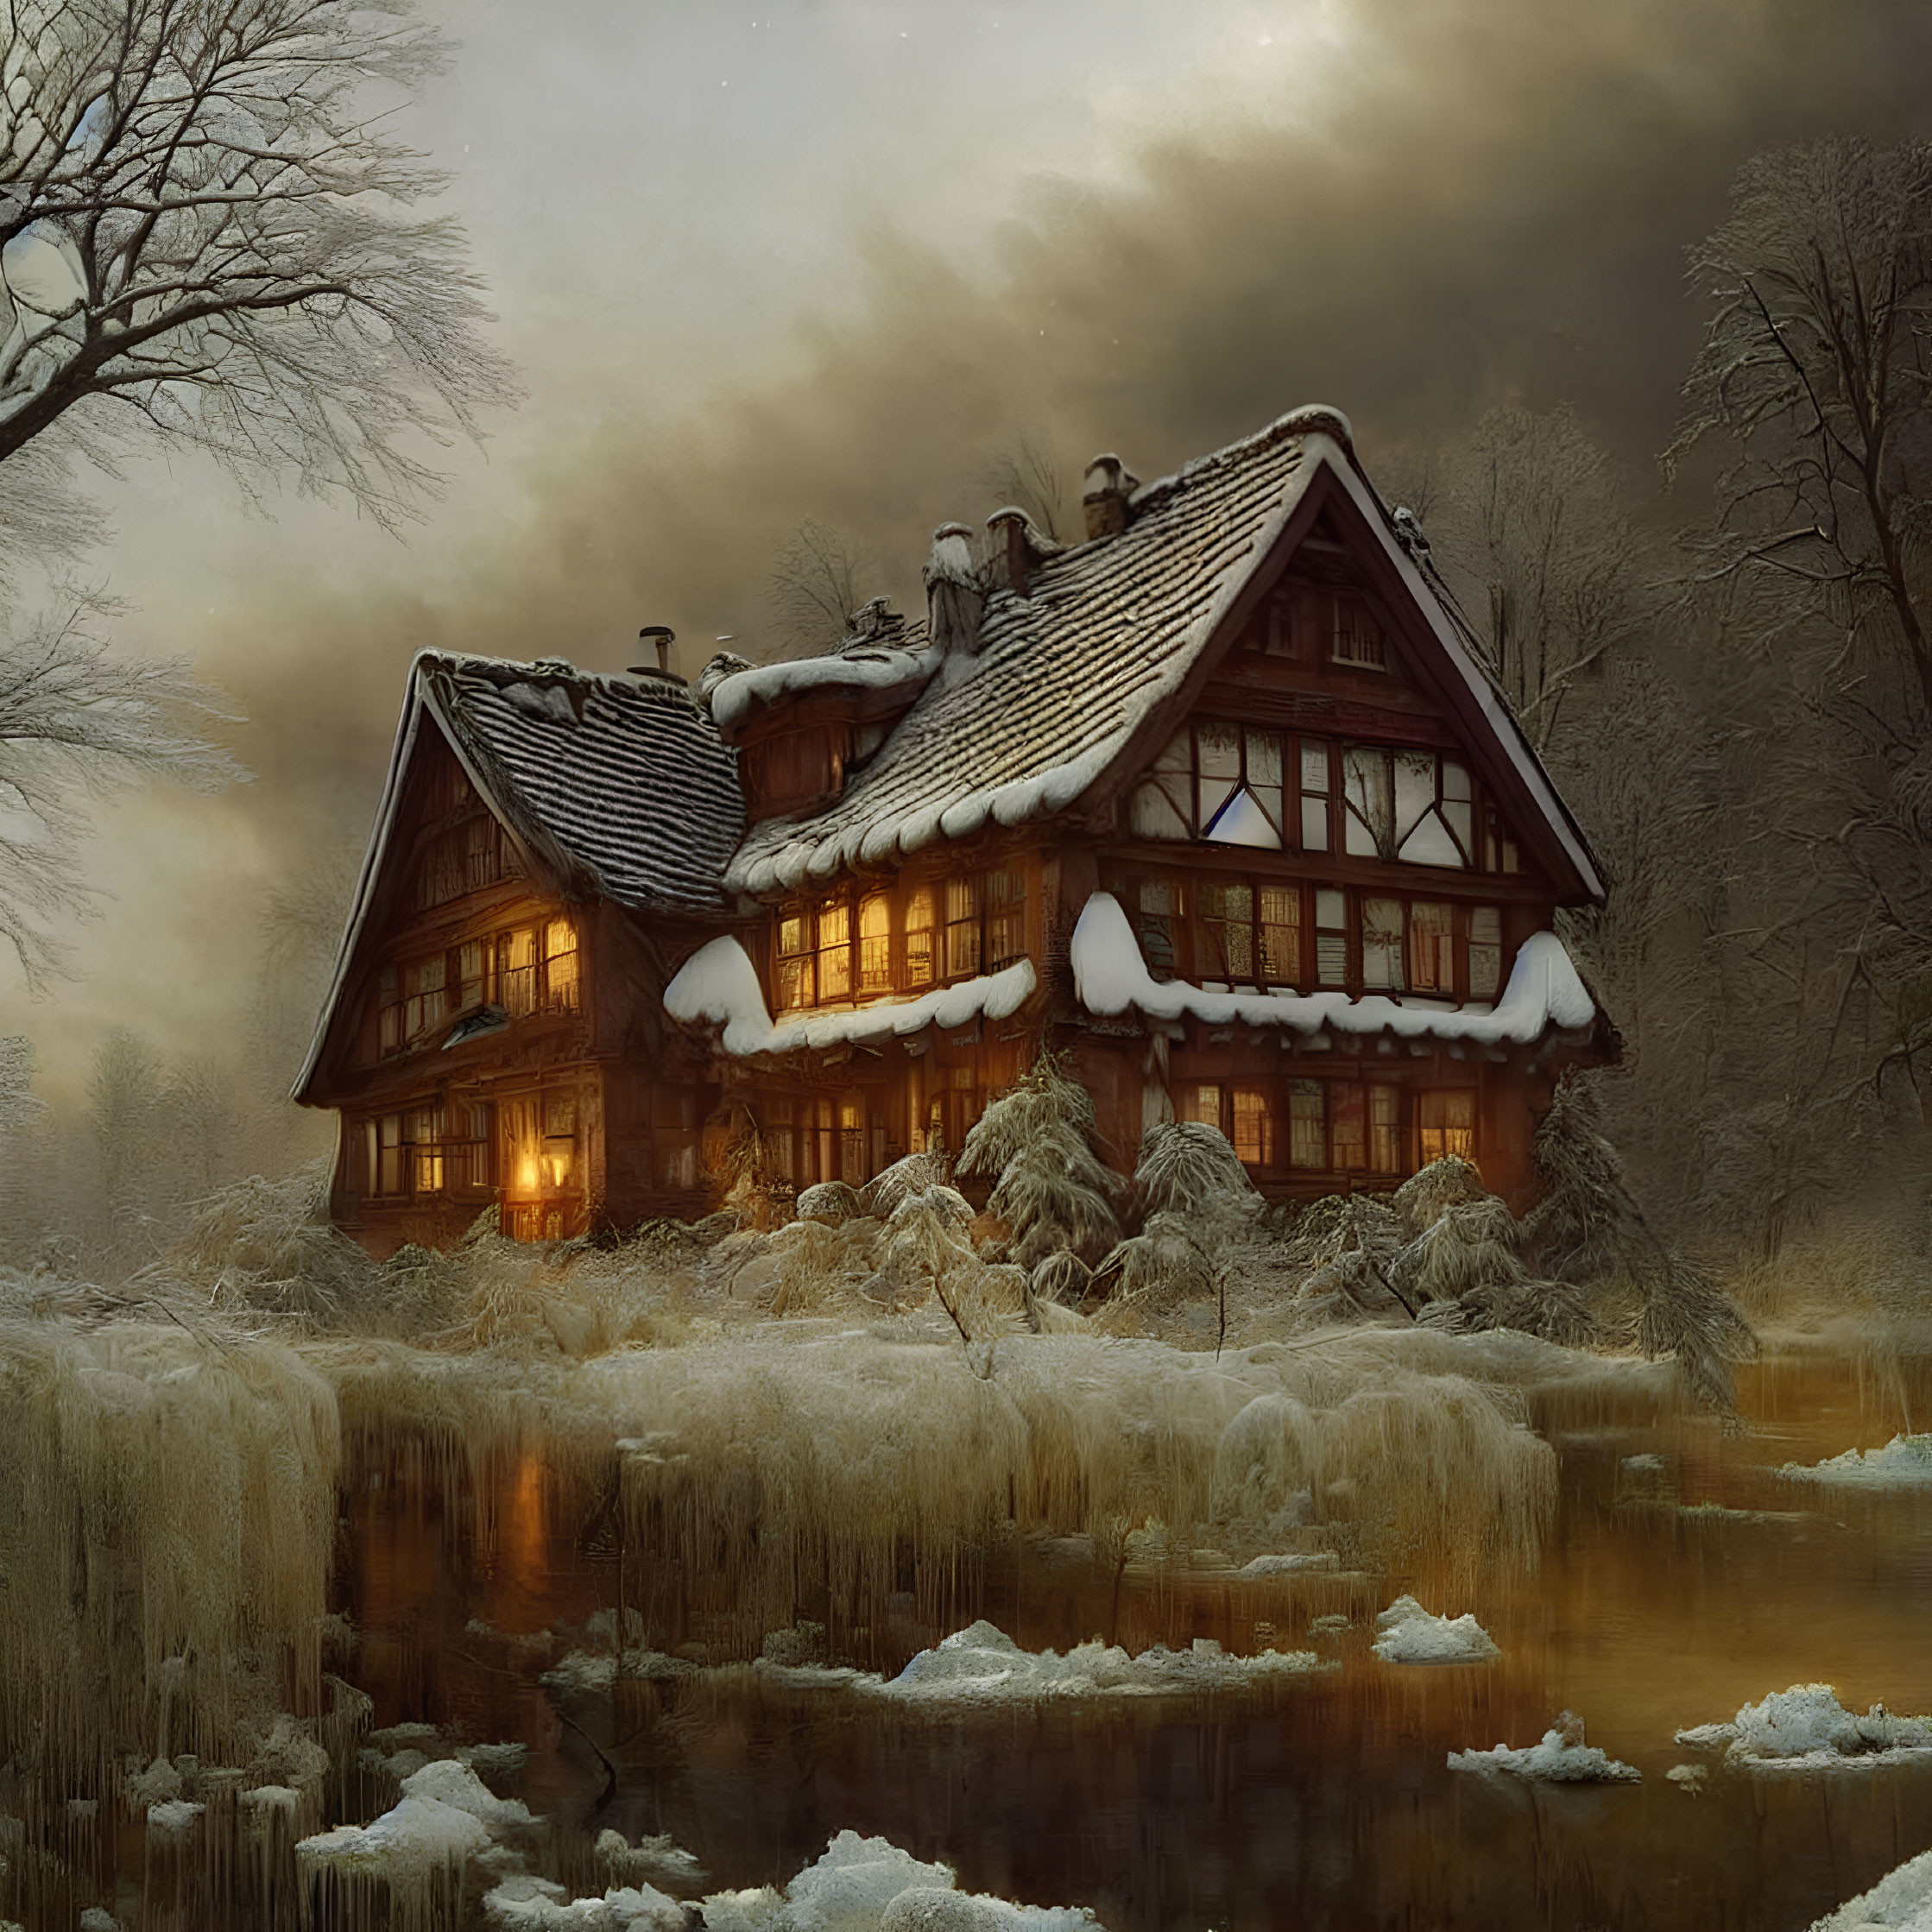 Snow-covered cottage by tranquil river in wintry forest landscape